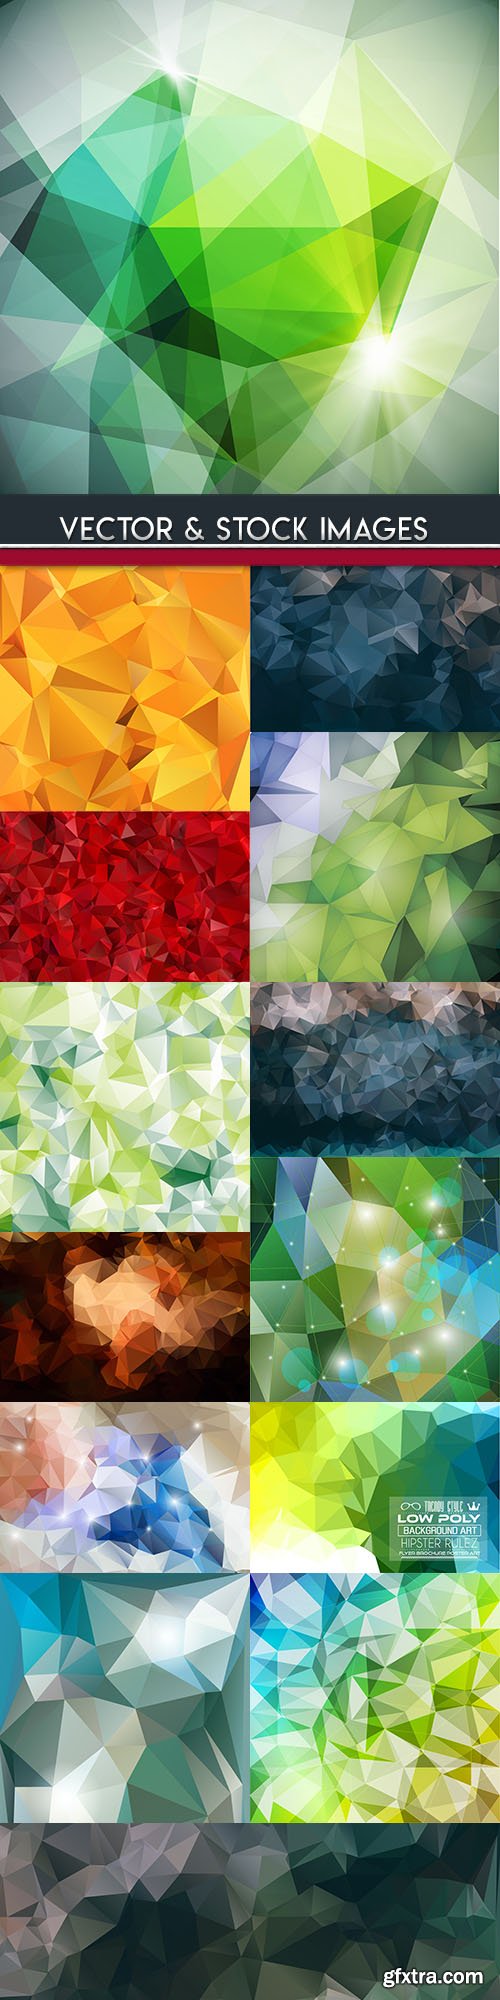 Polygon abstract creative modern background